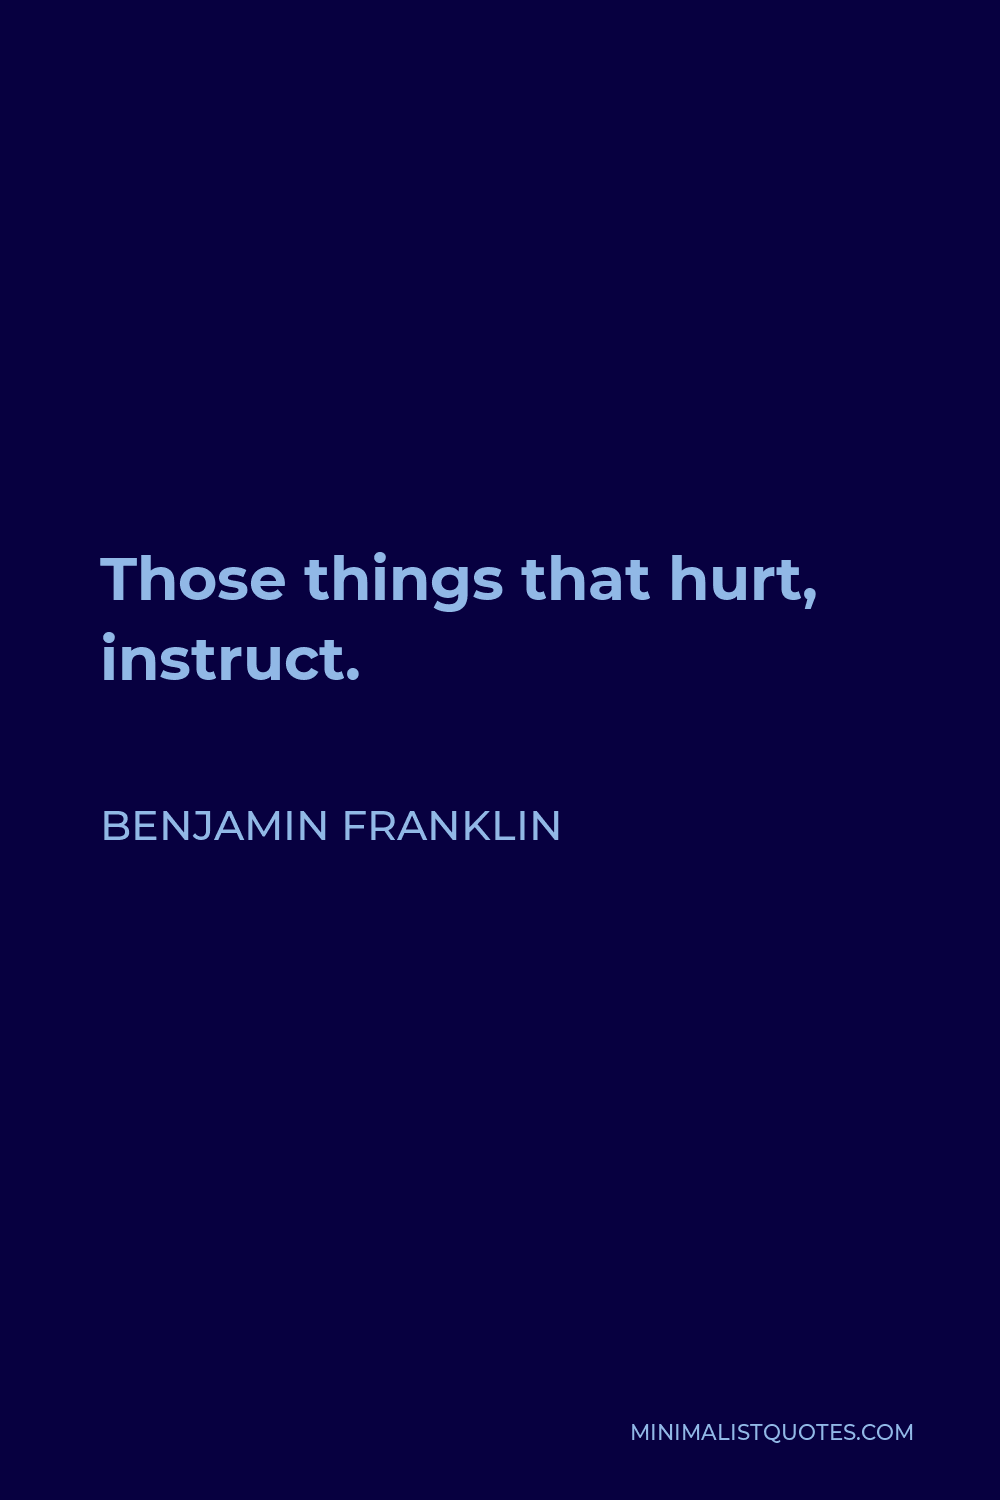 Benjamin Franklin Quote - Those things that hurt, instruct.